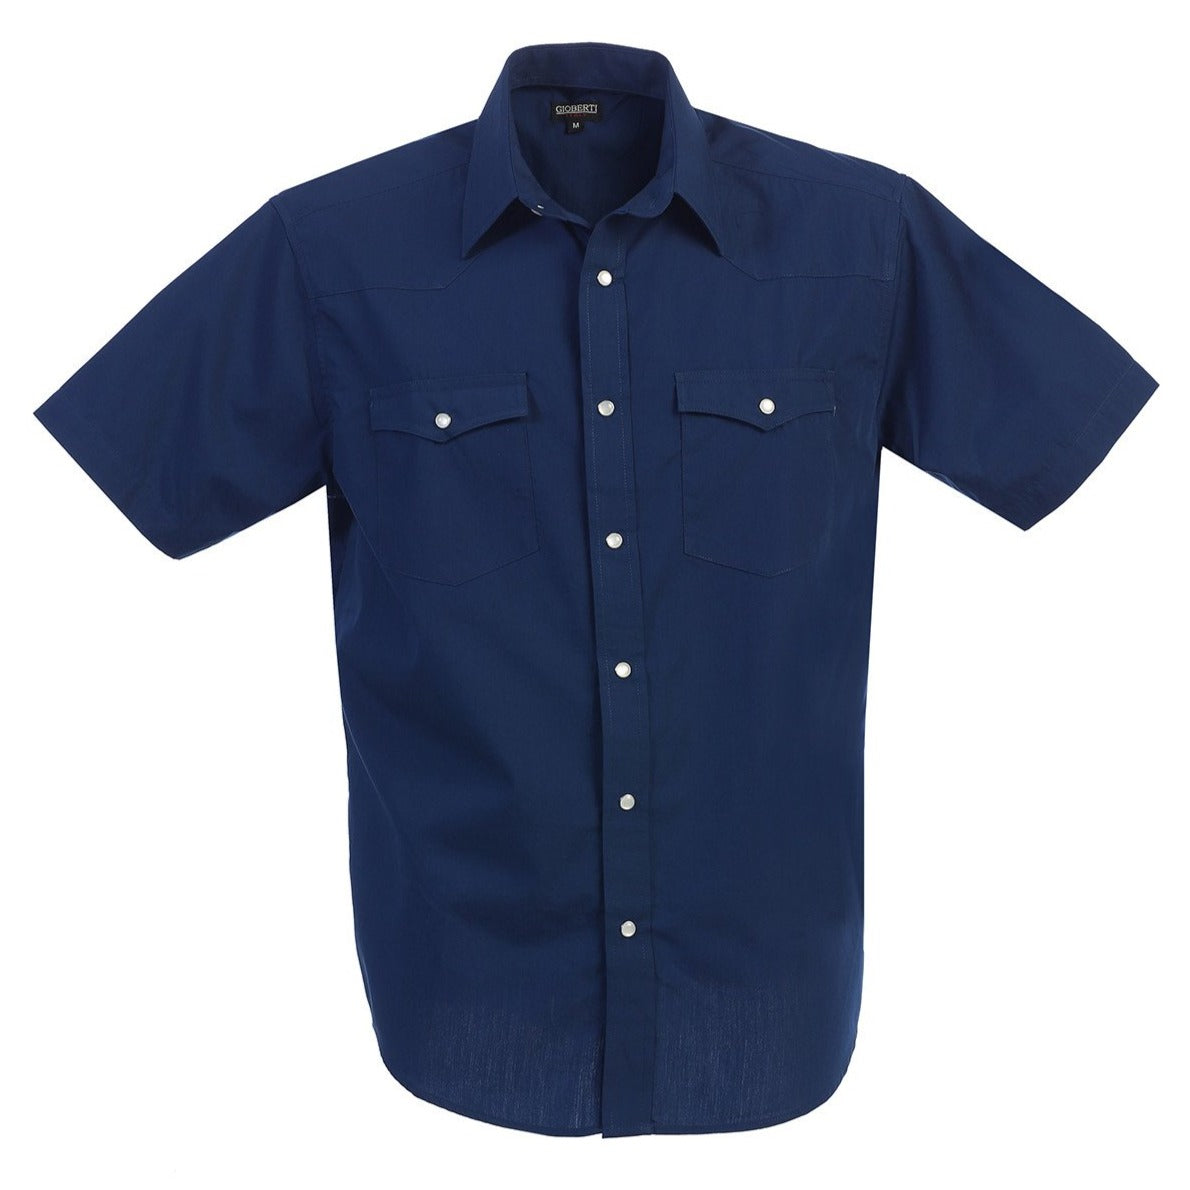 Western Classic Pearl Snap Shirt in Navy MEN